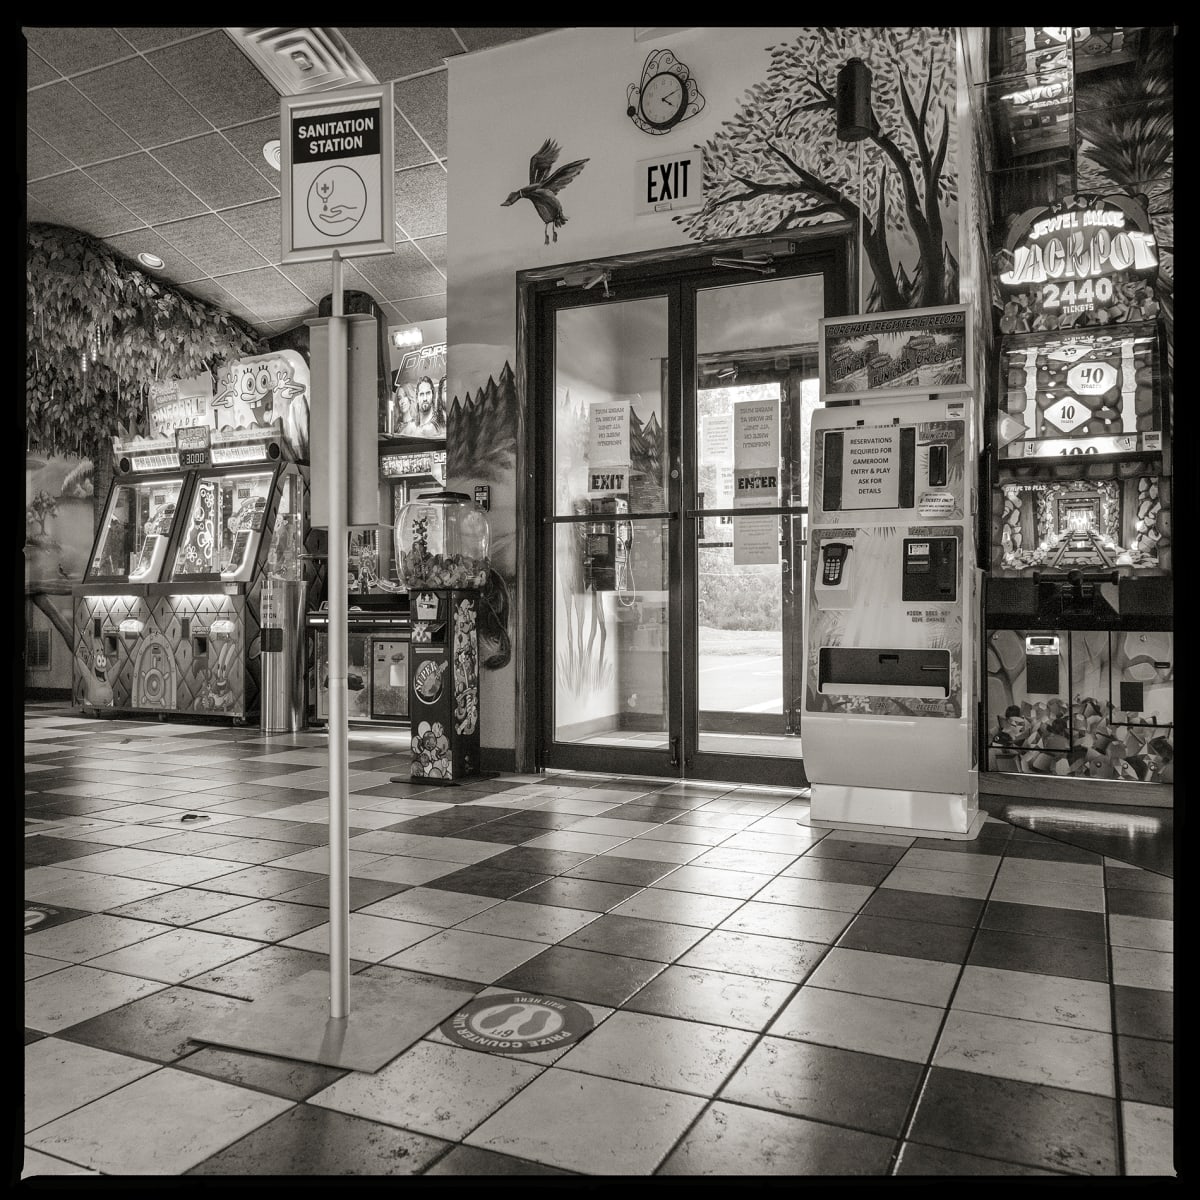 585.427.9535 – Clubhouse Fun Center, 70 Jay Scutti Boulevard, Henrietta, NY, 14623 by Eric T. Kunsman  Image: ID: A black and white image shows a glass door, where through the door there is a payphone on the left wall.  On the inner side of the door there are various game machines and a pattern tiled floor.